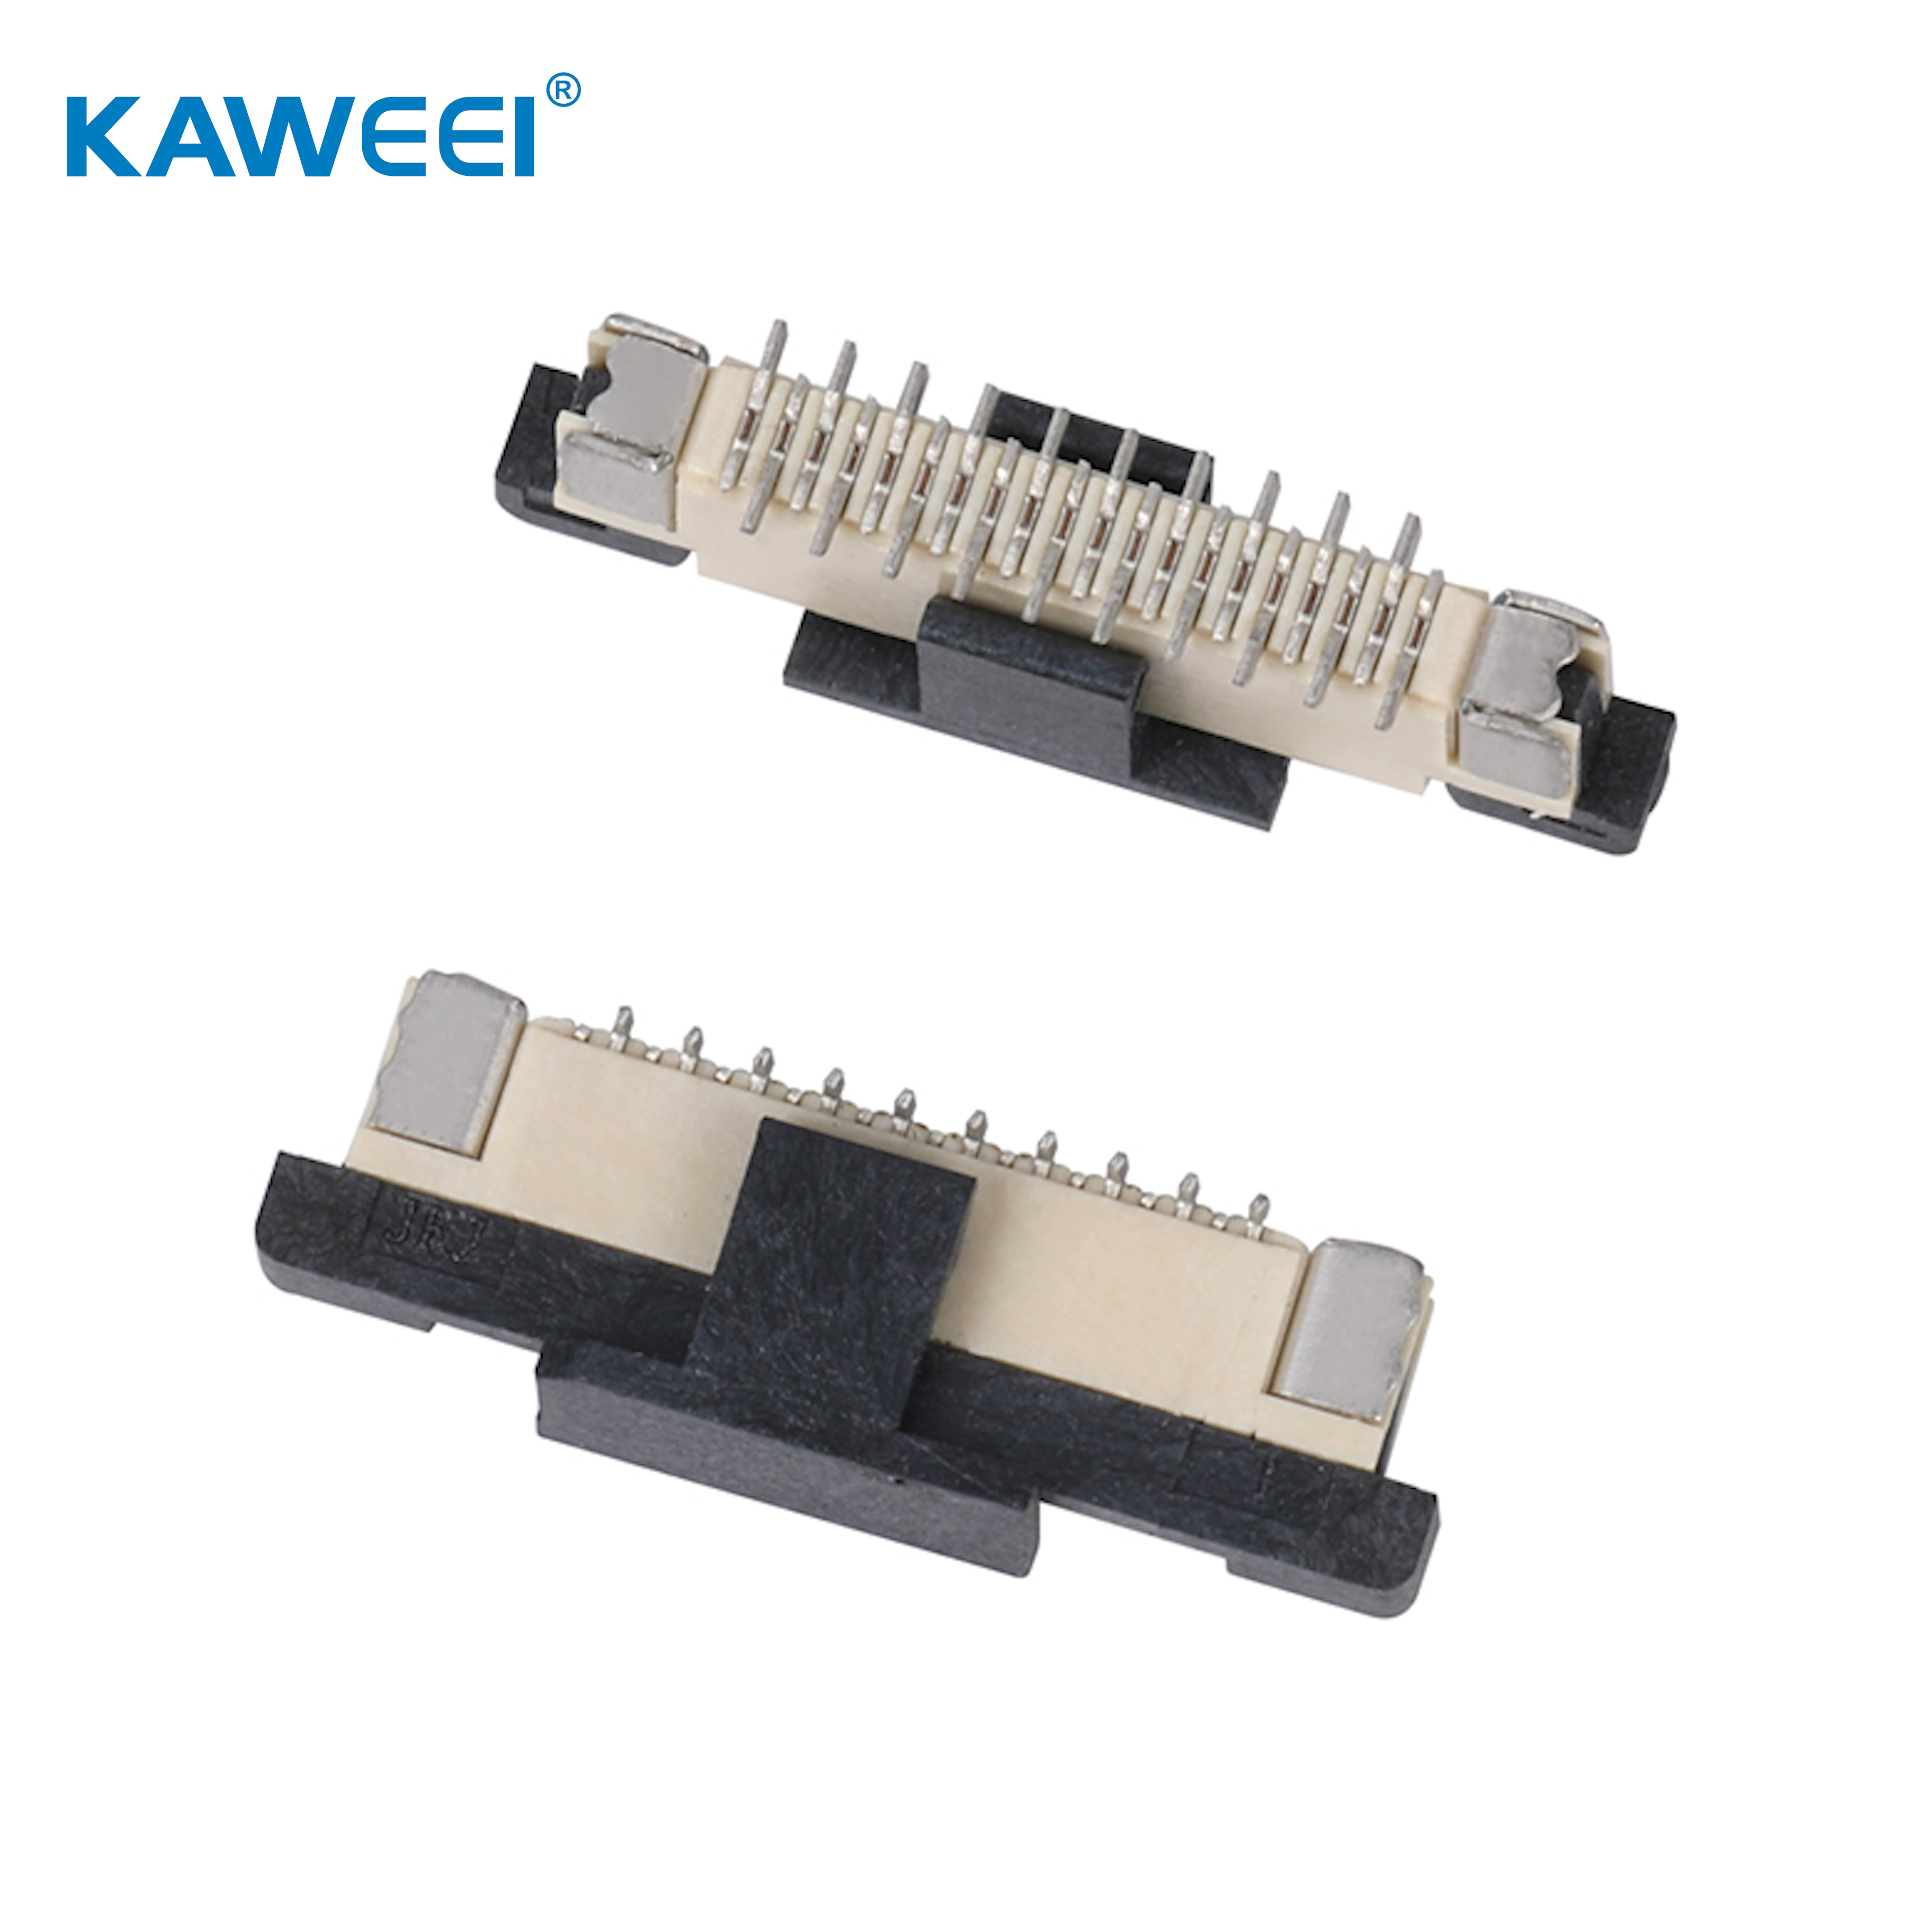 0.5mm pitch ffc/fpc vertical SMT connector